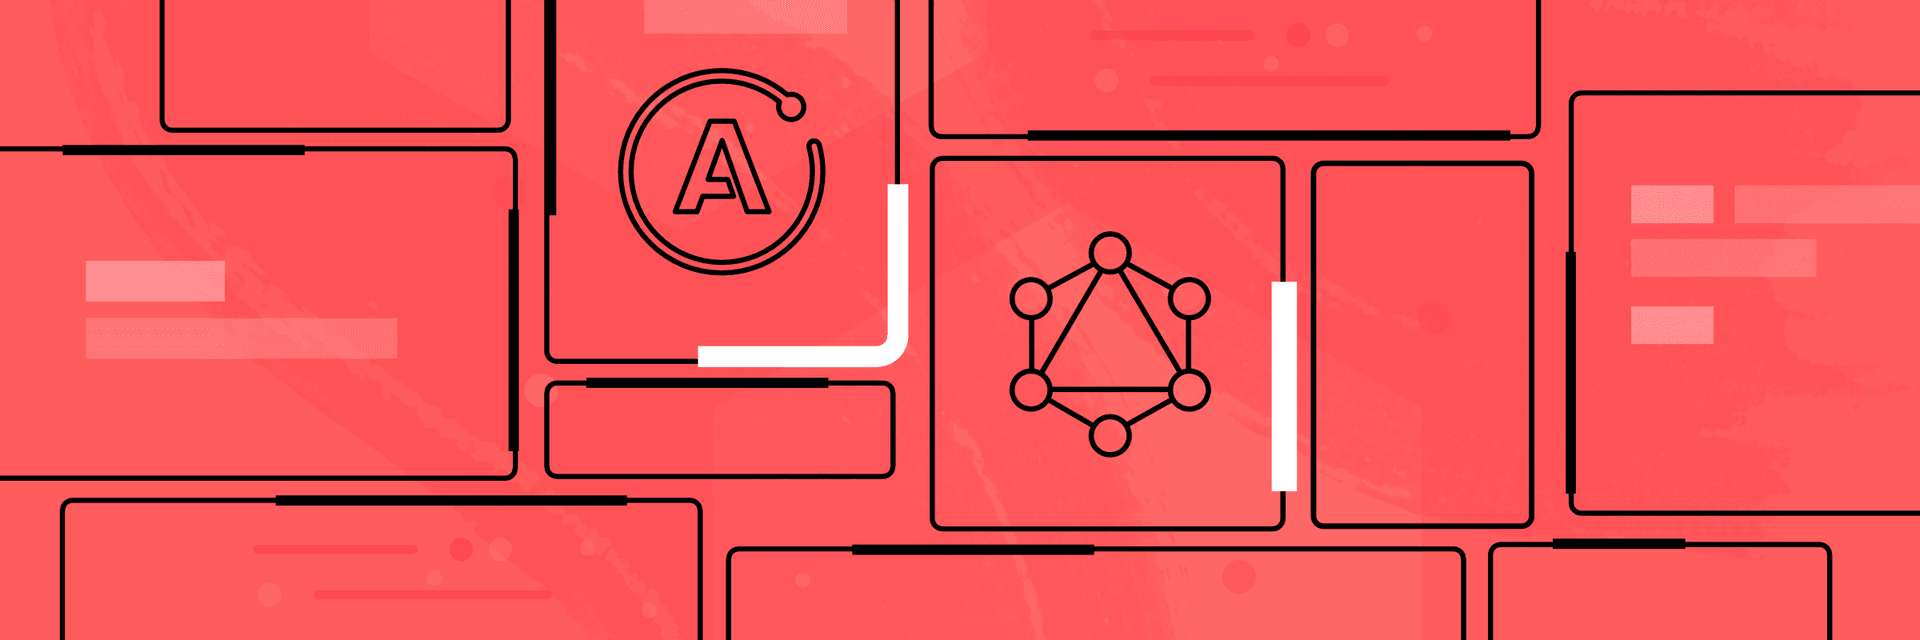 Introducing the Apollo GraphQL Platform for implementing the GraphQL Specification